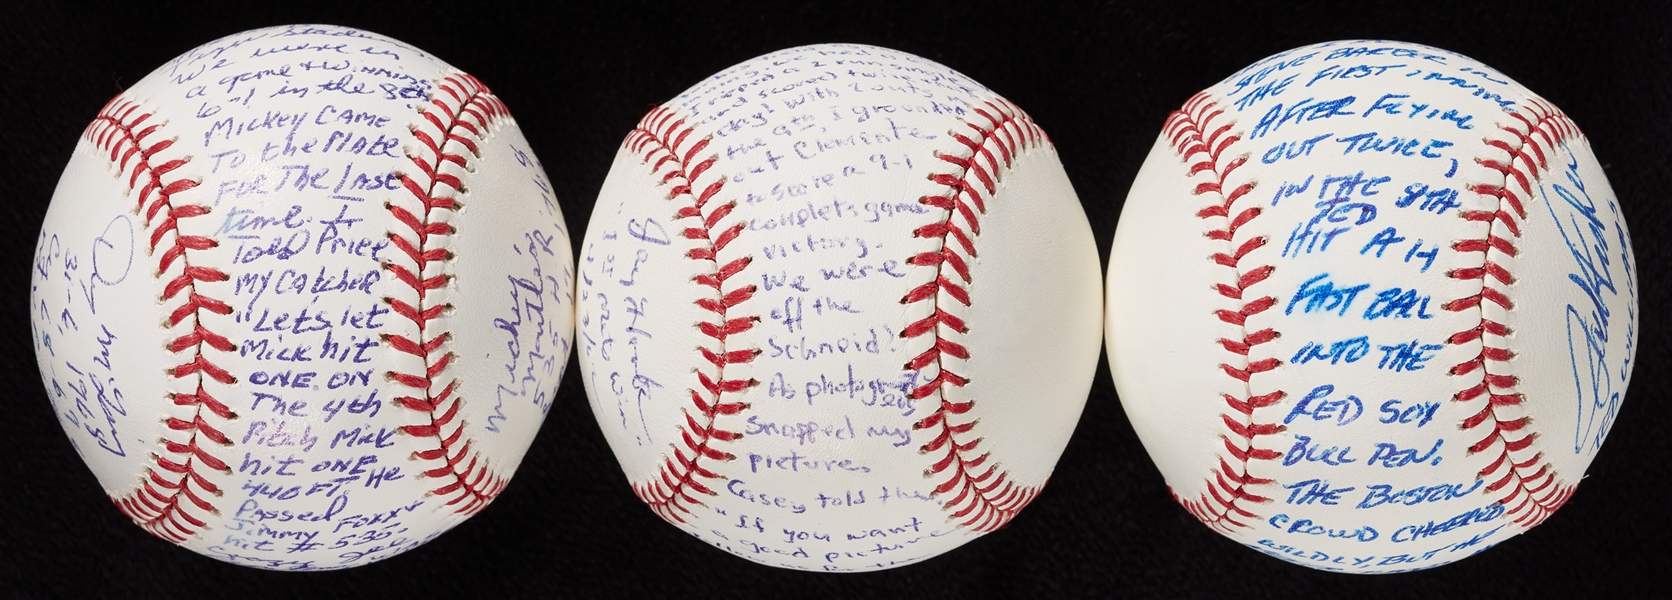 Signed Story Balls Group with Mantle's 535th Home Run, Williams Last Home Run, 1st Mets Win (3) (JSA)